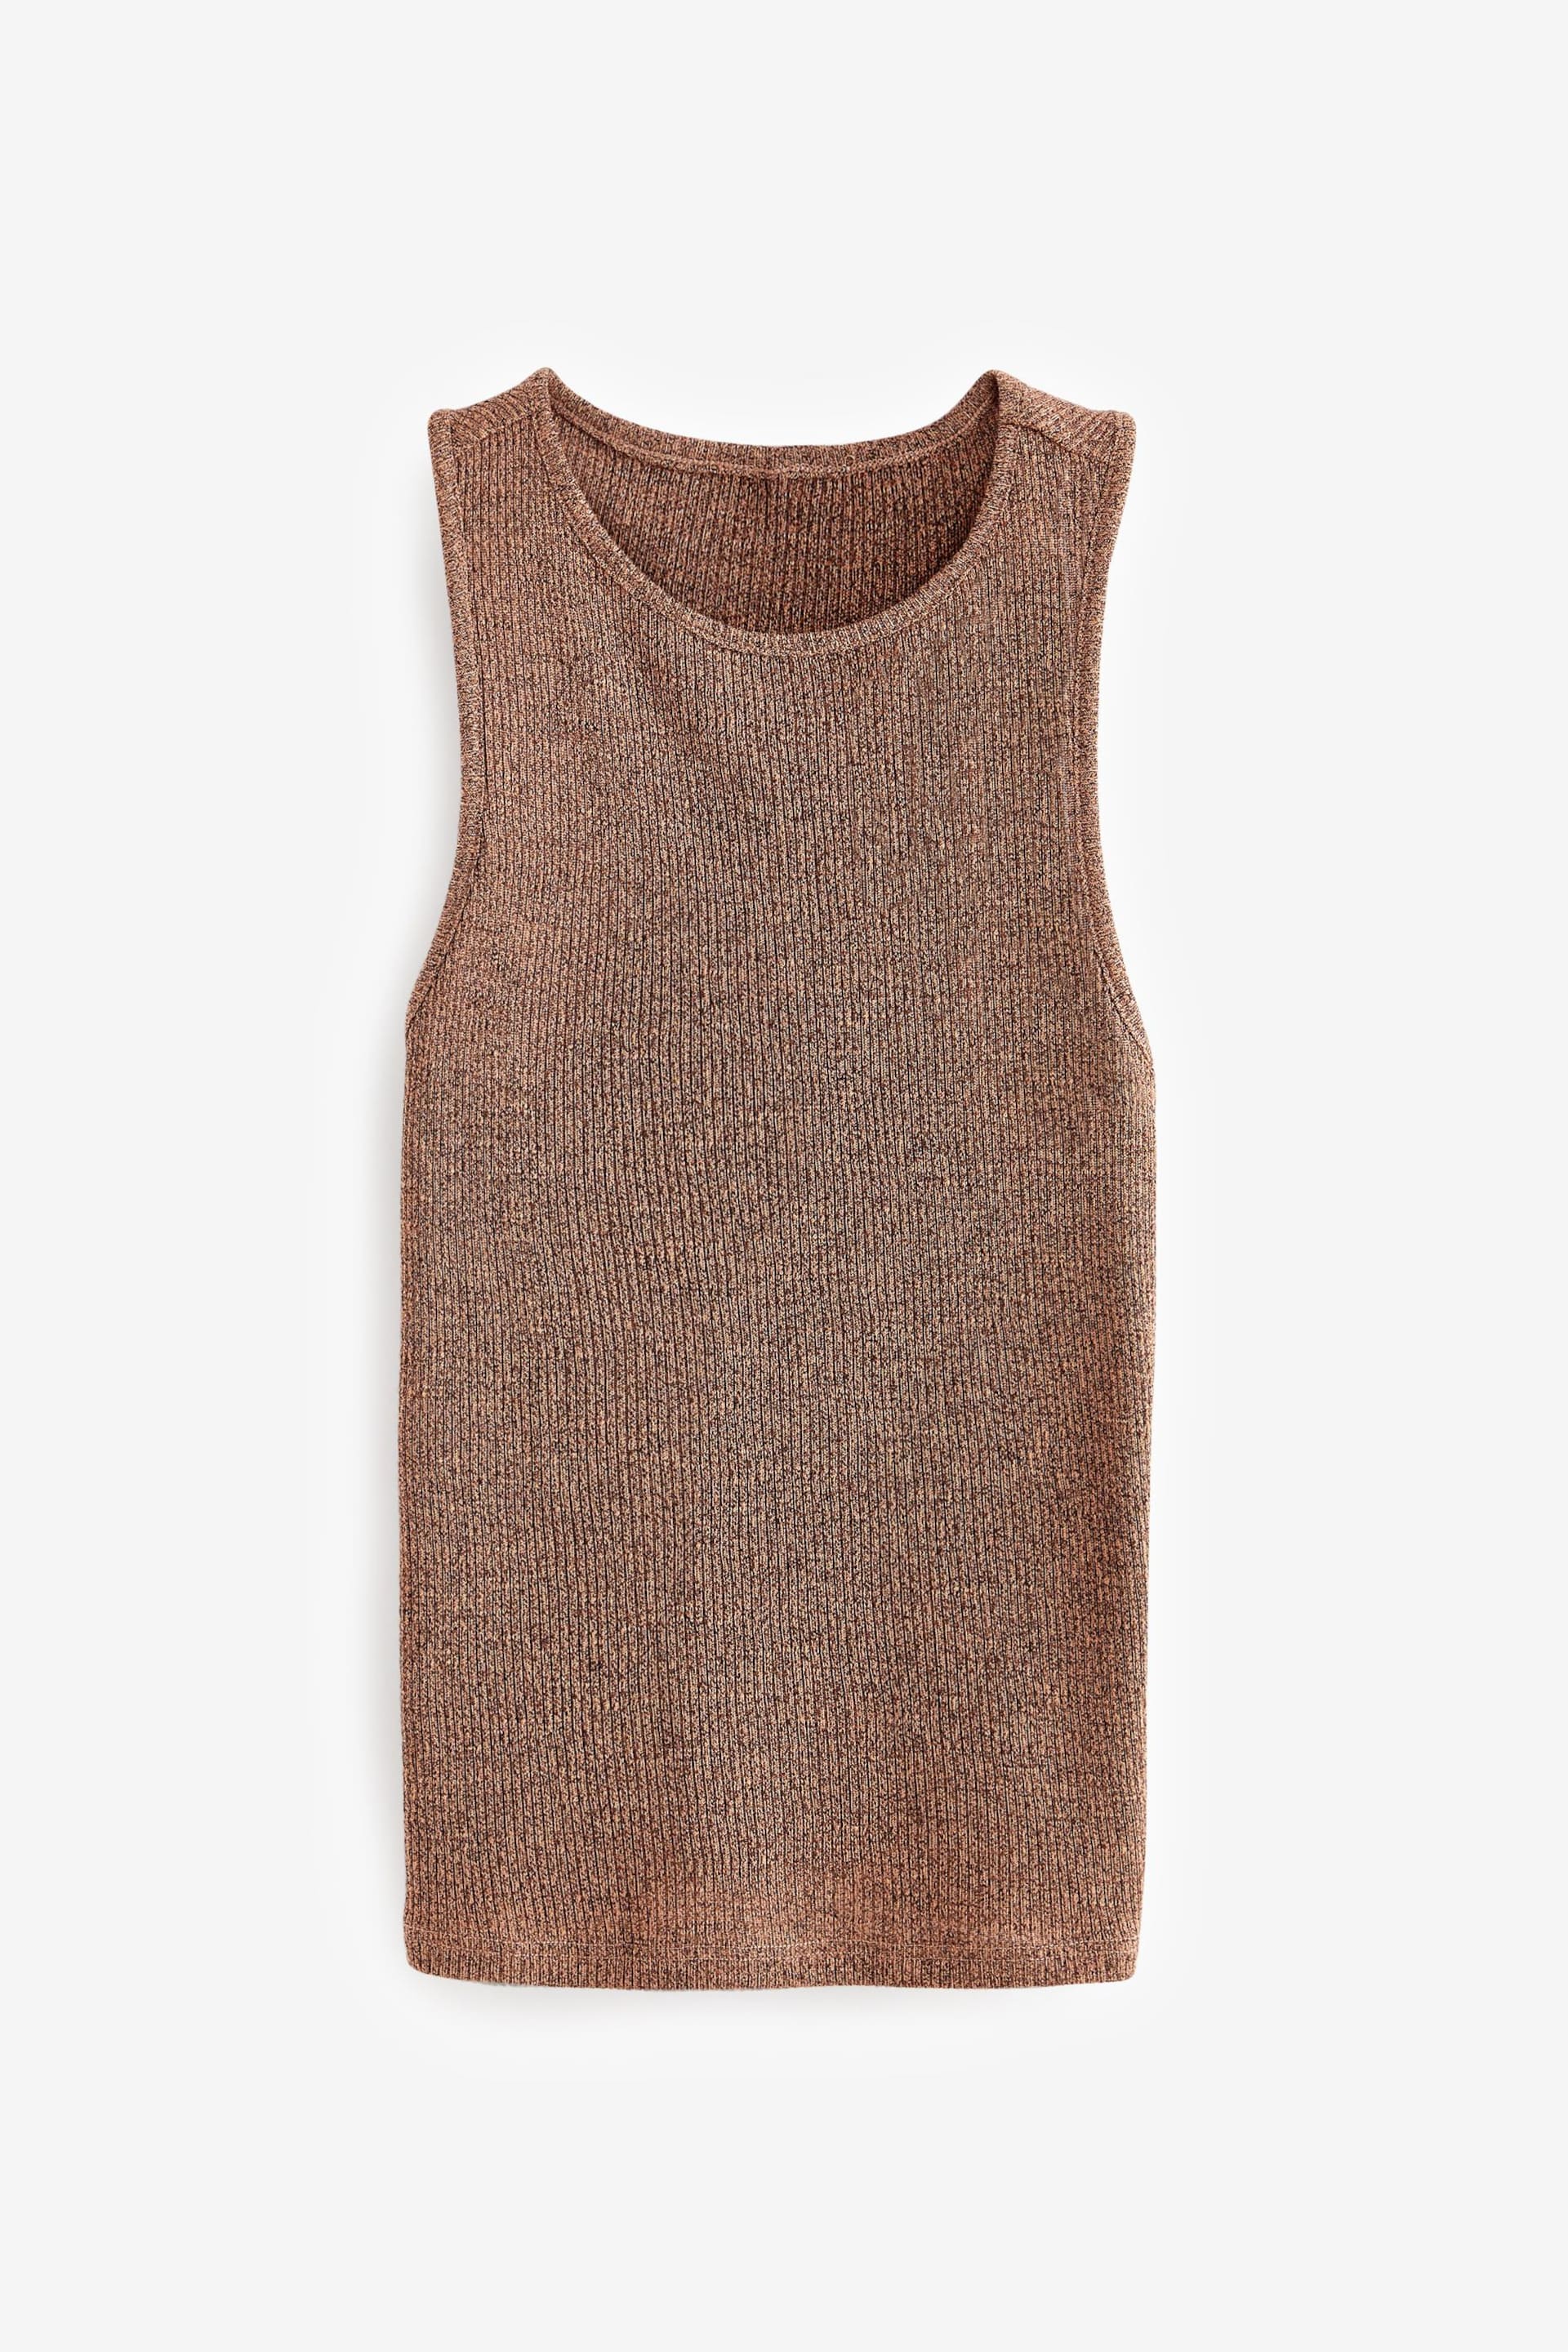 Rust Marl Ribbed High Neck Vest - Image 4 of 5